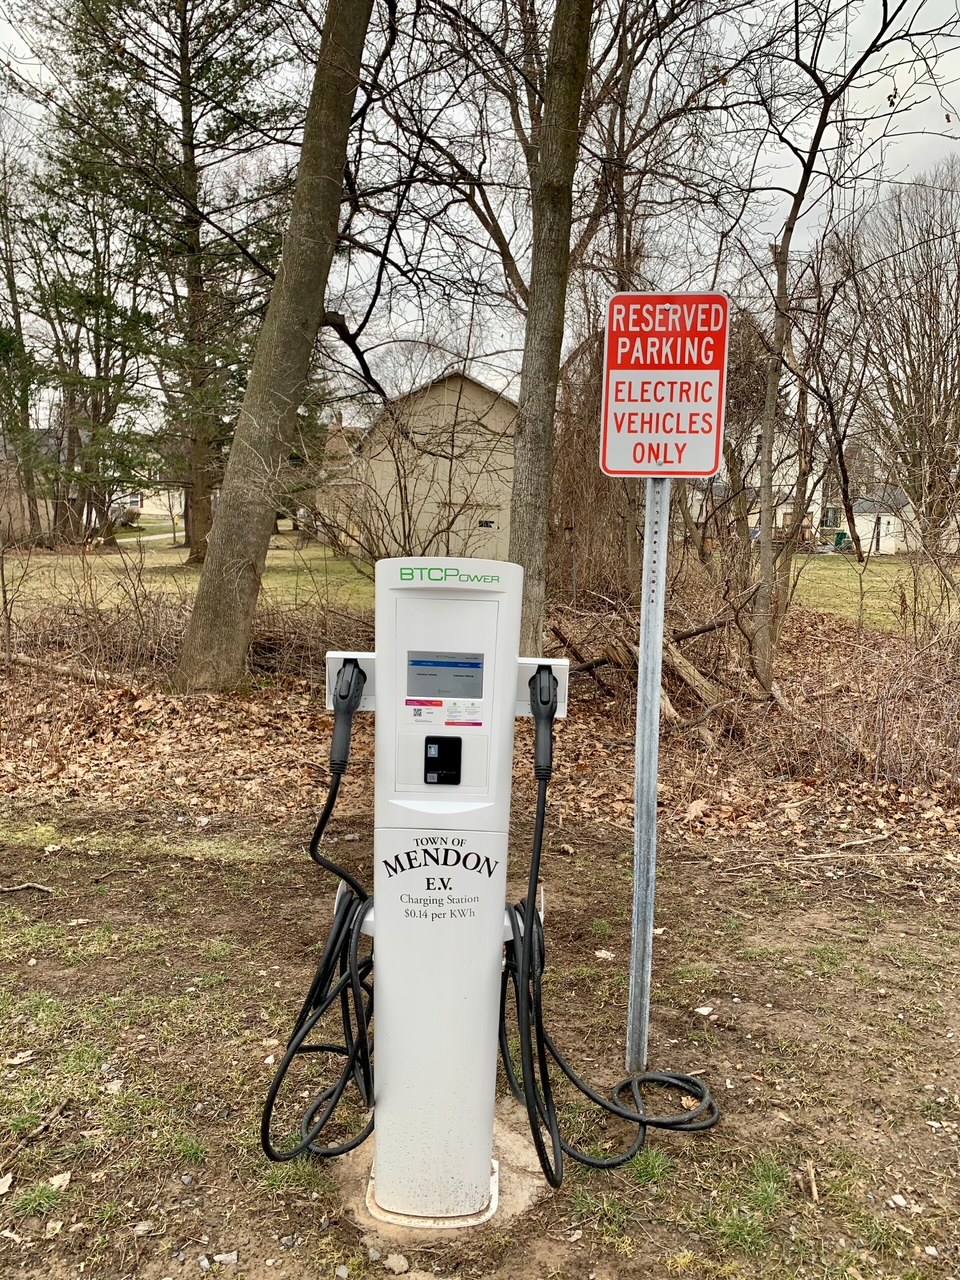 Town of Mendon Installs Electric Car Charging Station at Mendon Public Library